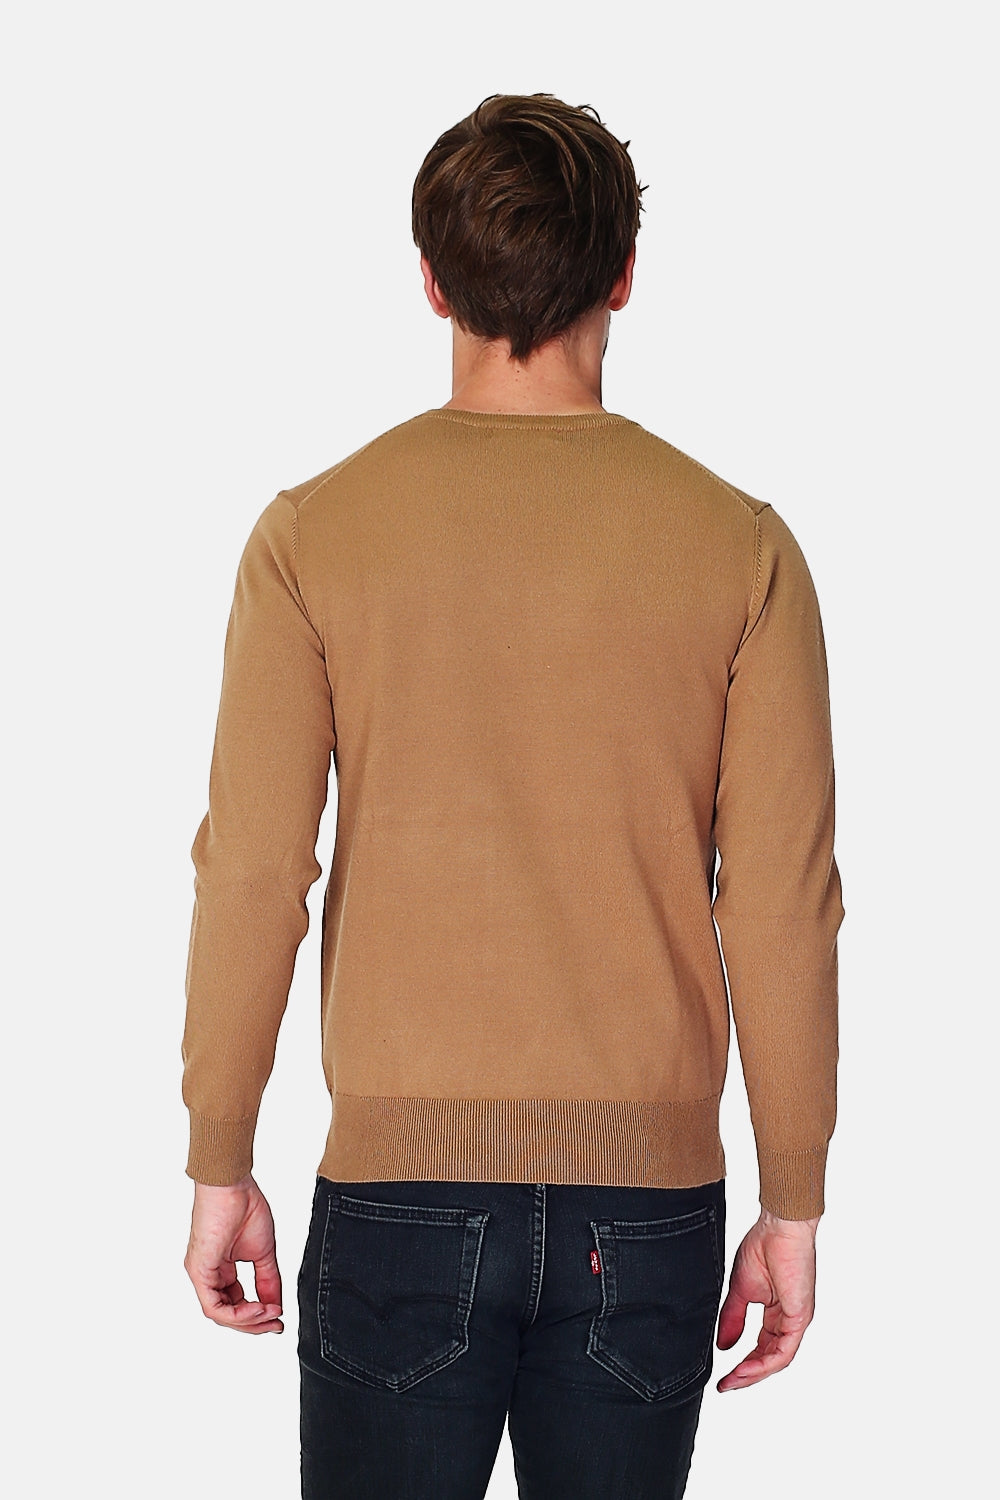 Fancy knit crewneck sweater in 3 threads with long sleeves